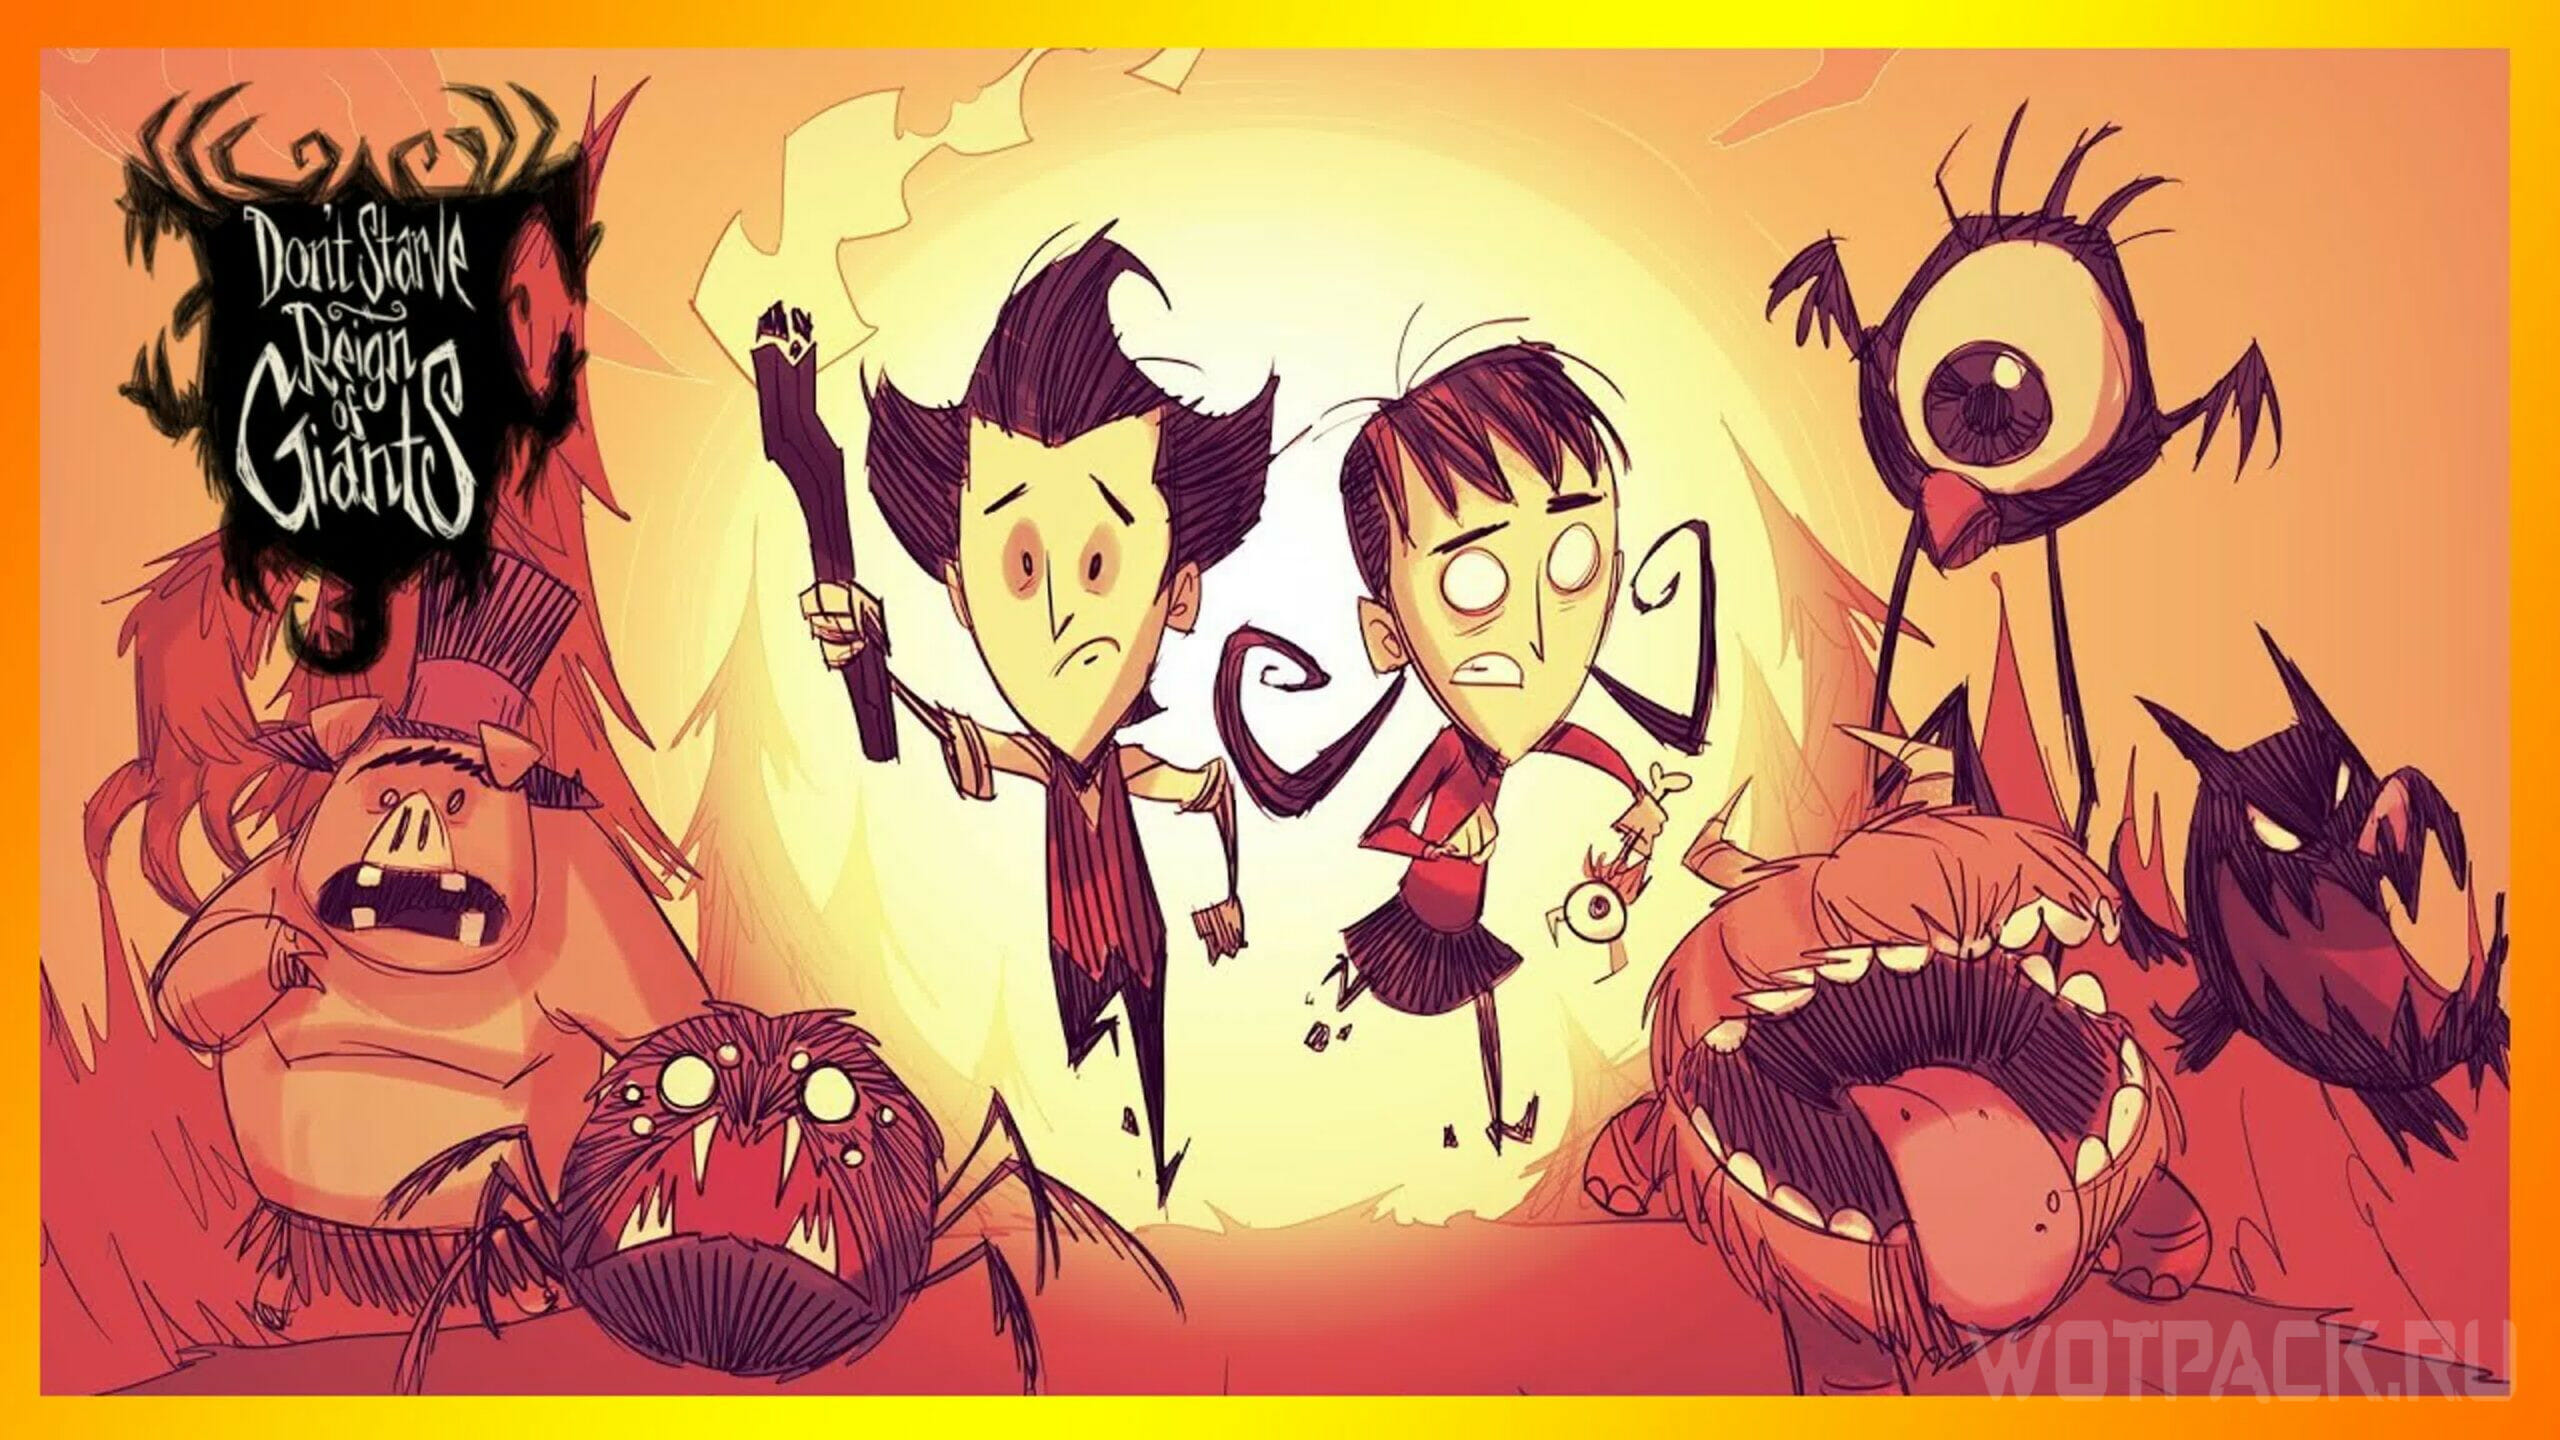 Ю донт фул. Don t Starve игра. Дон старв тугеза. Don't Starve together карнавал. Don't Starve together игрушки.